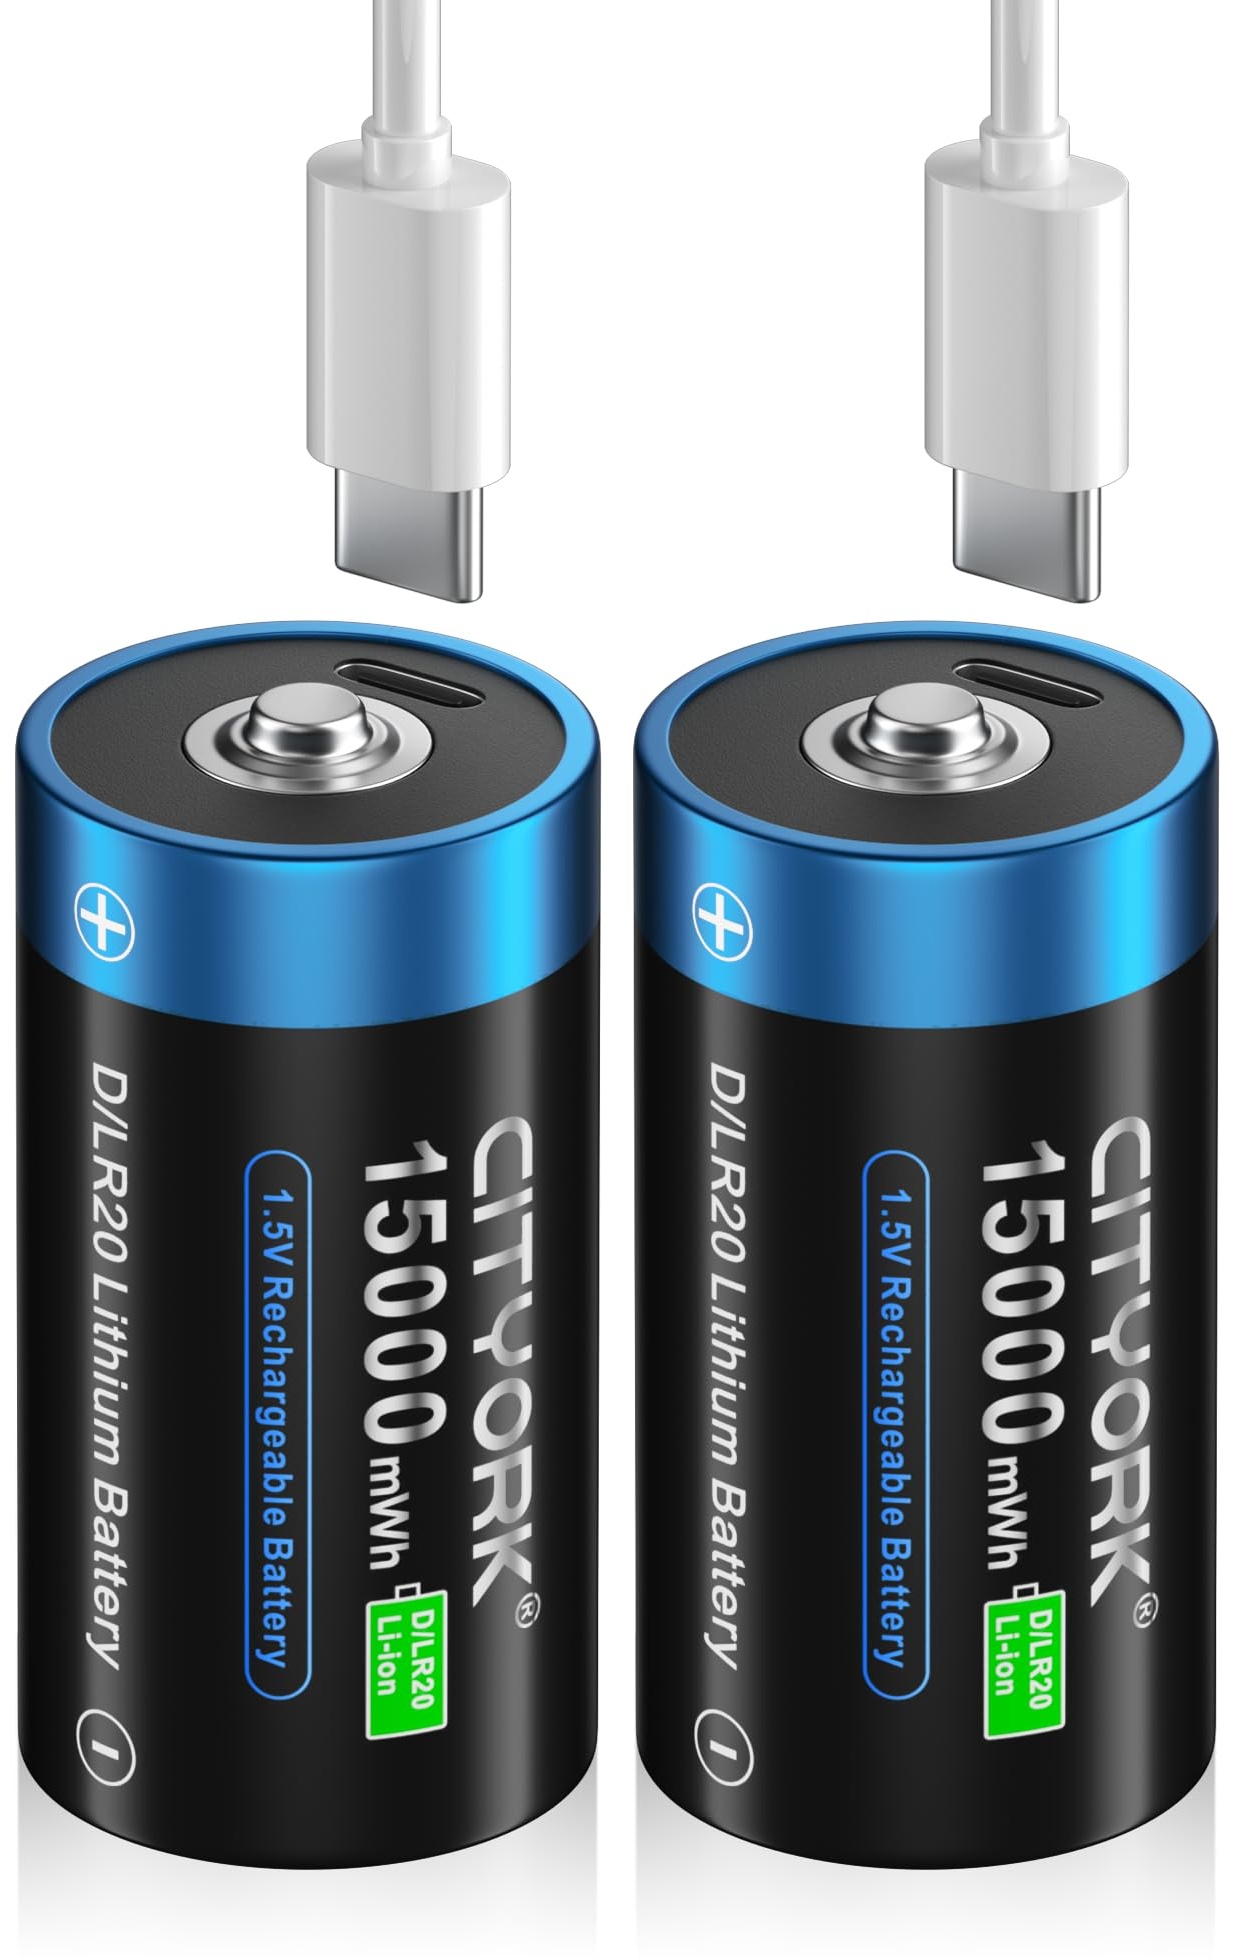 CITYORK USB wiederaufladbare D-Batterie 1,5 V 15000 mWh (2 Stück) – Konstante Spannung – ideal for Toys, Torches, CD Players and Other Battery-Powered Devices